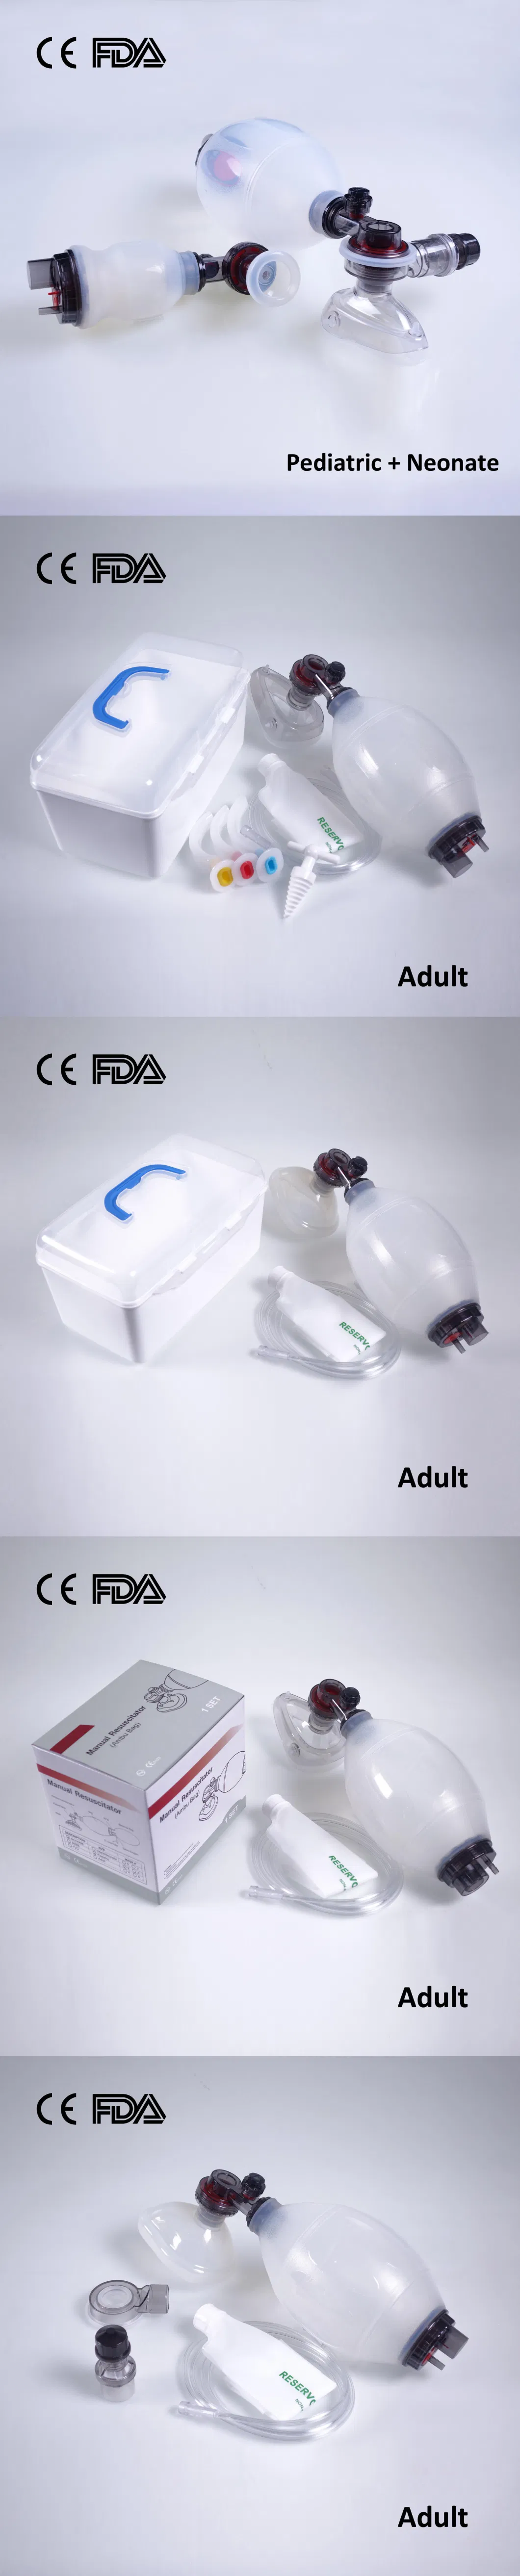 Reusable Medical Silicone Anesthesia Mask Factory Adult L, Size 5# Pear-Shaped Silicone + PC Cover Split Mask with CE FDA